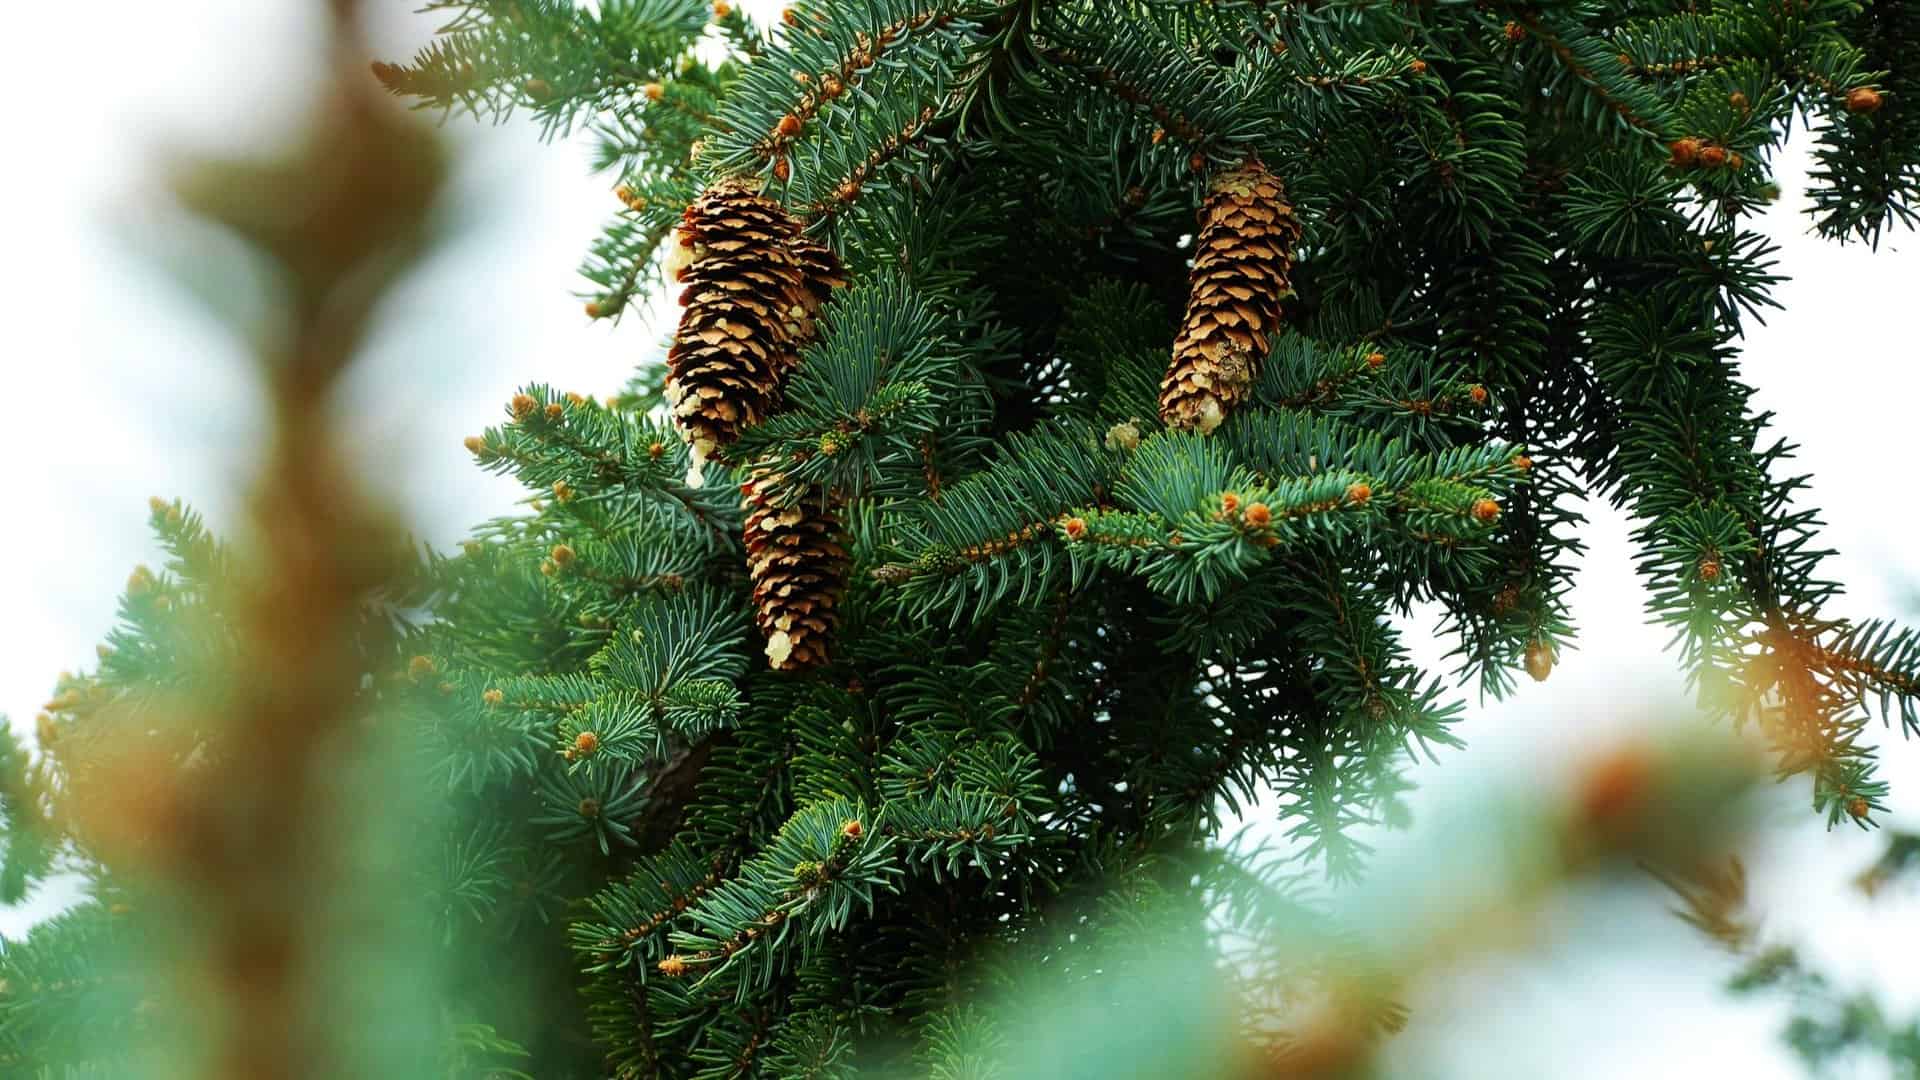 Watering your evergreen trees, shrubs and broadleaf evergreens before winter